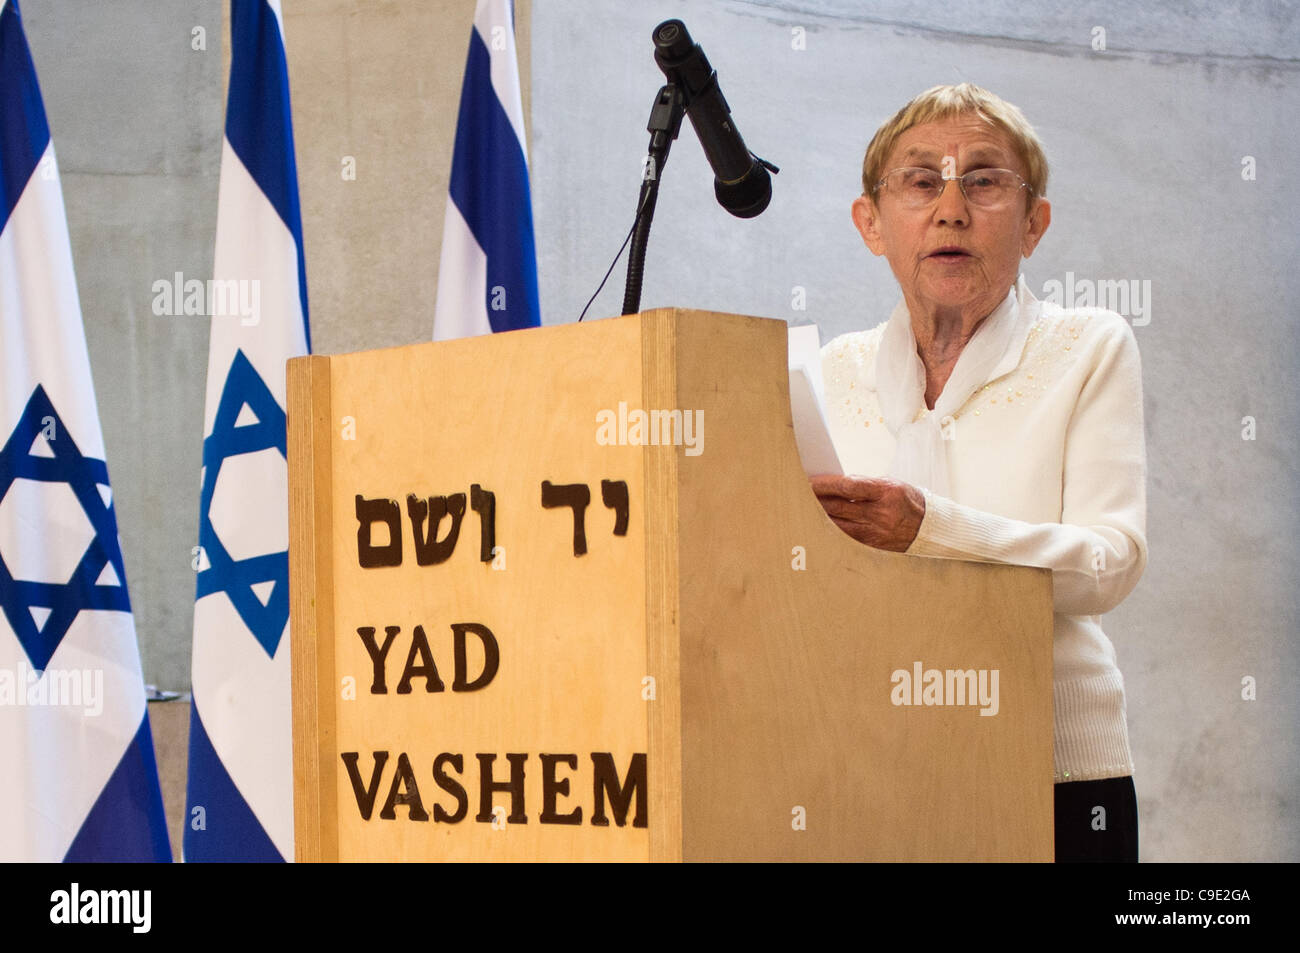 Survivor Hedva Gil addresses the audience immediately after Anna Suchecka honored at Yad Vashem with medal and certificate of honor on behalf of her father, Adolf Otto, as Righteous Among the Nations. Jerusalem, Israel. 28th November 2011. Stock Photo